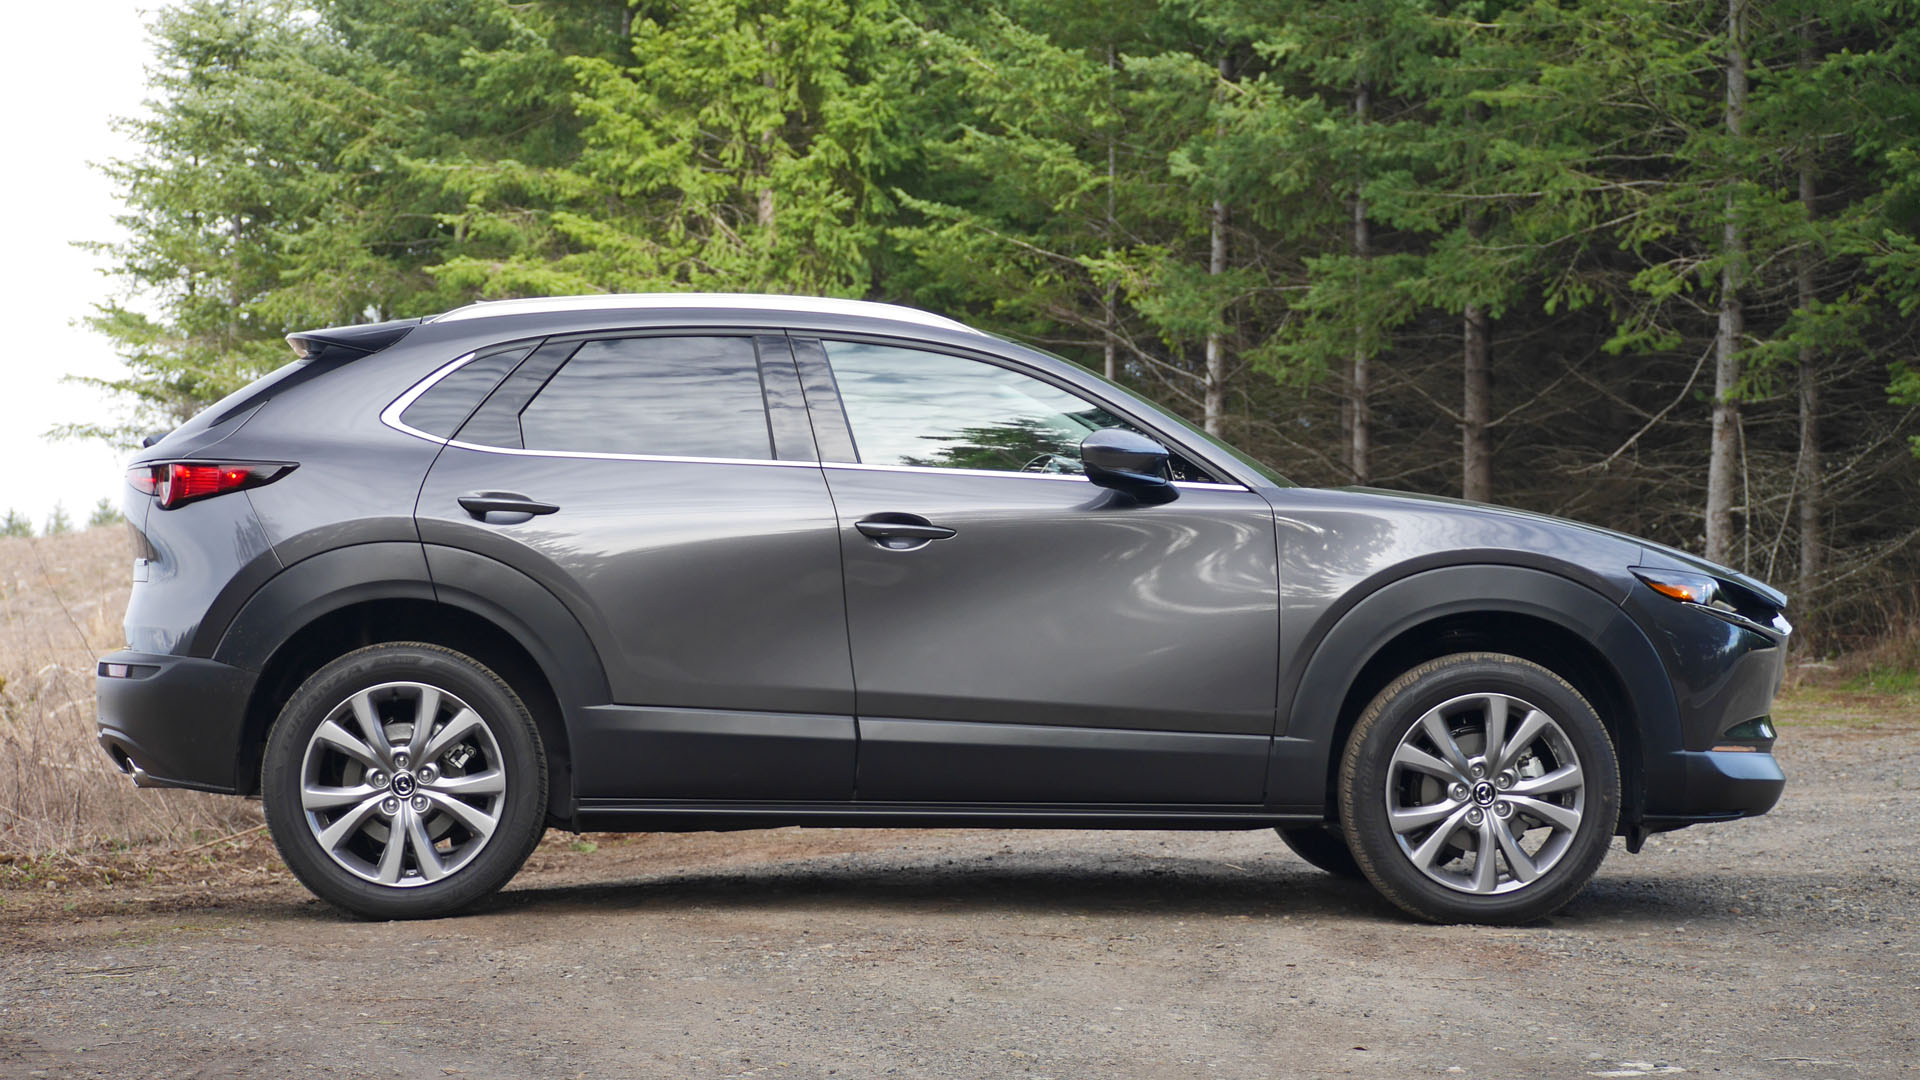 2021 Mazda CX-30 Review | Price, specs, features and photos - Autoblog